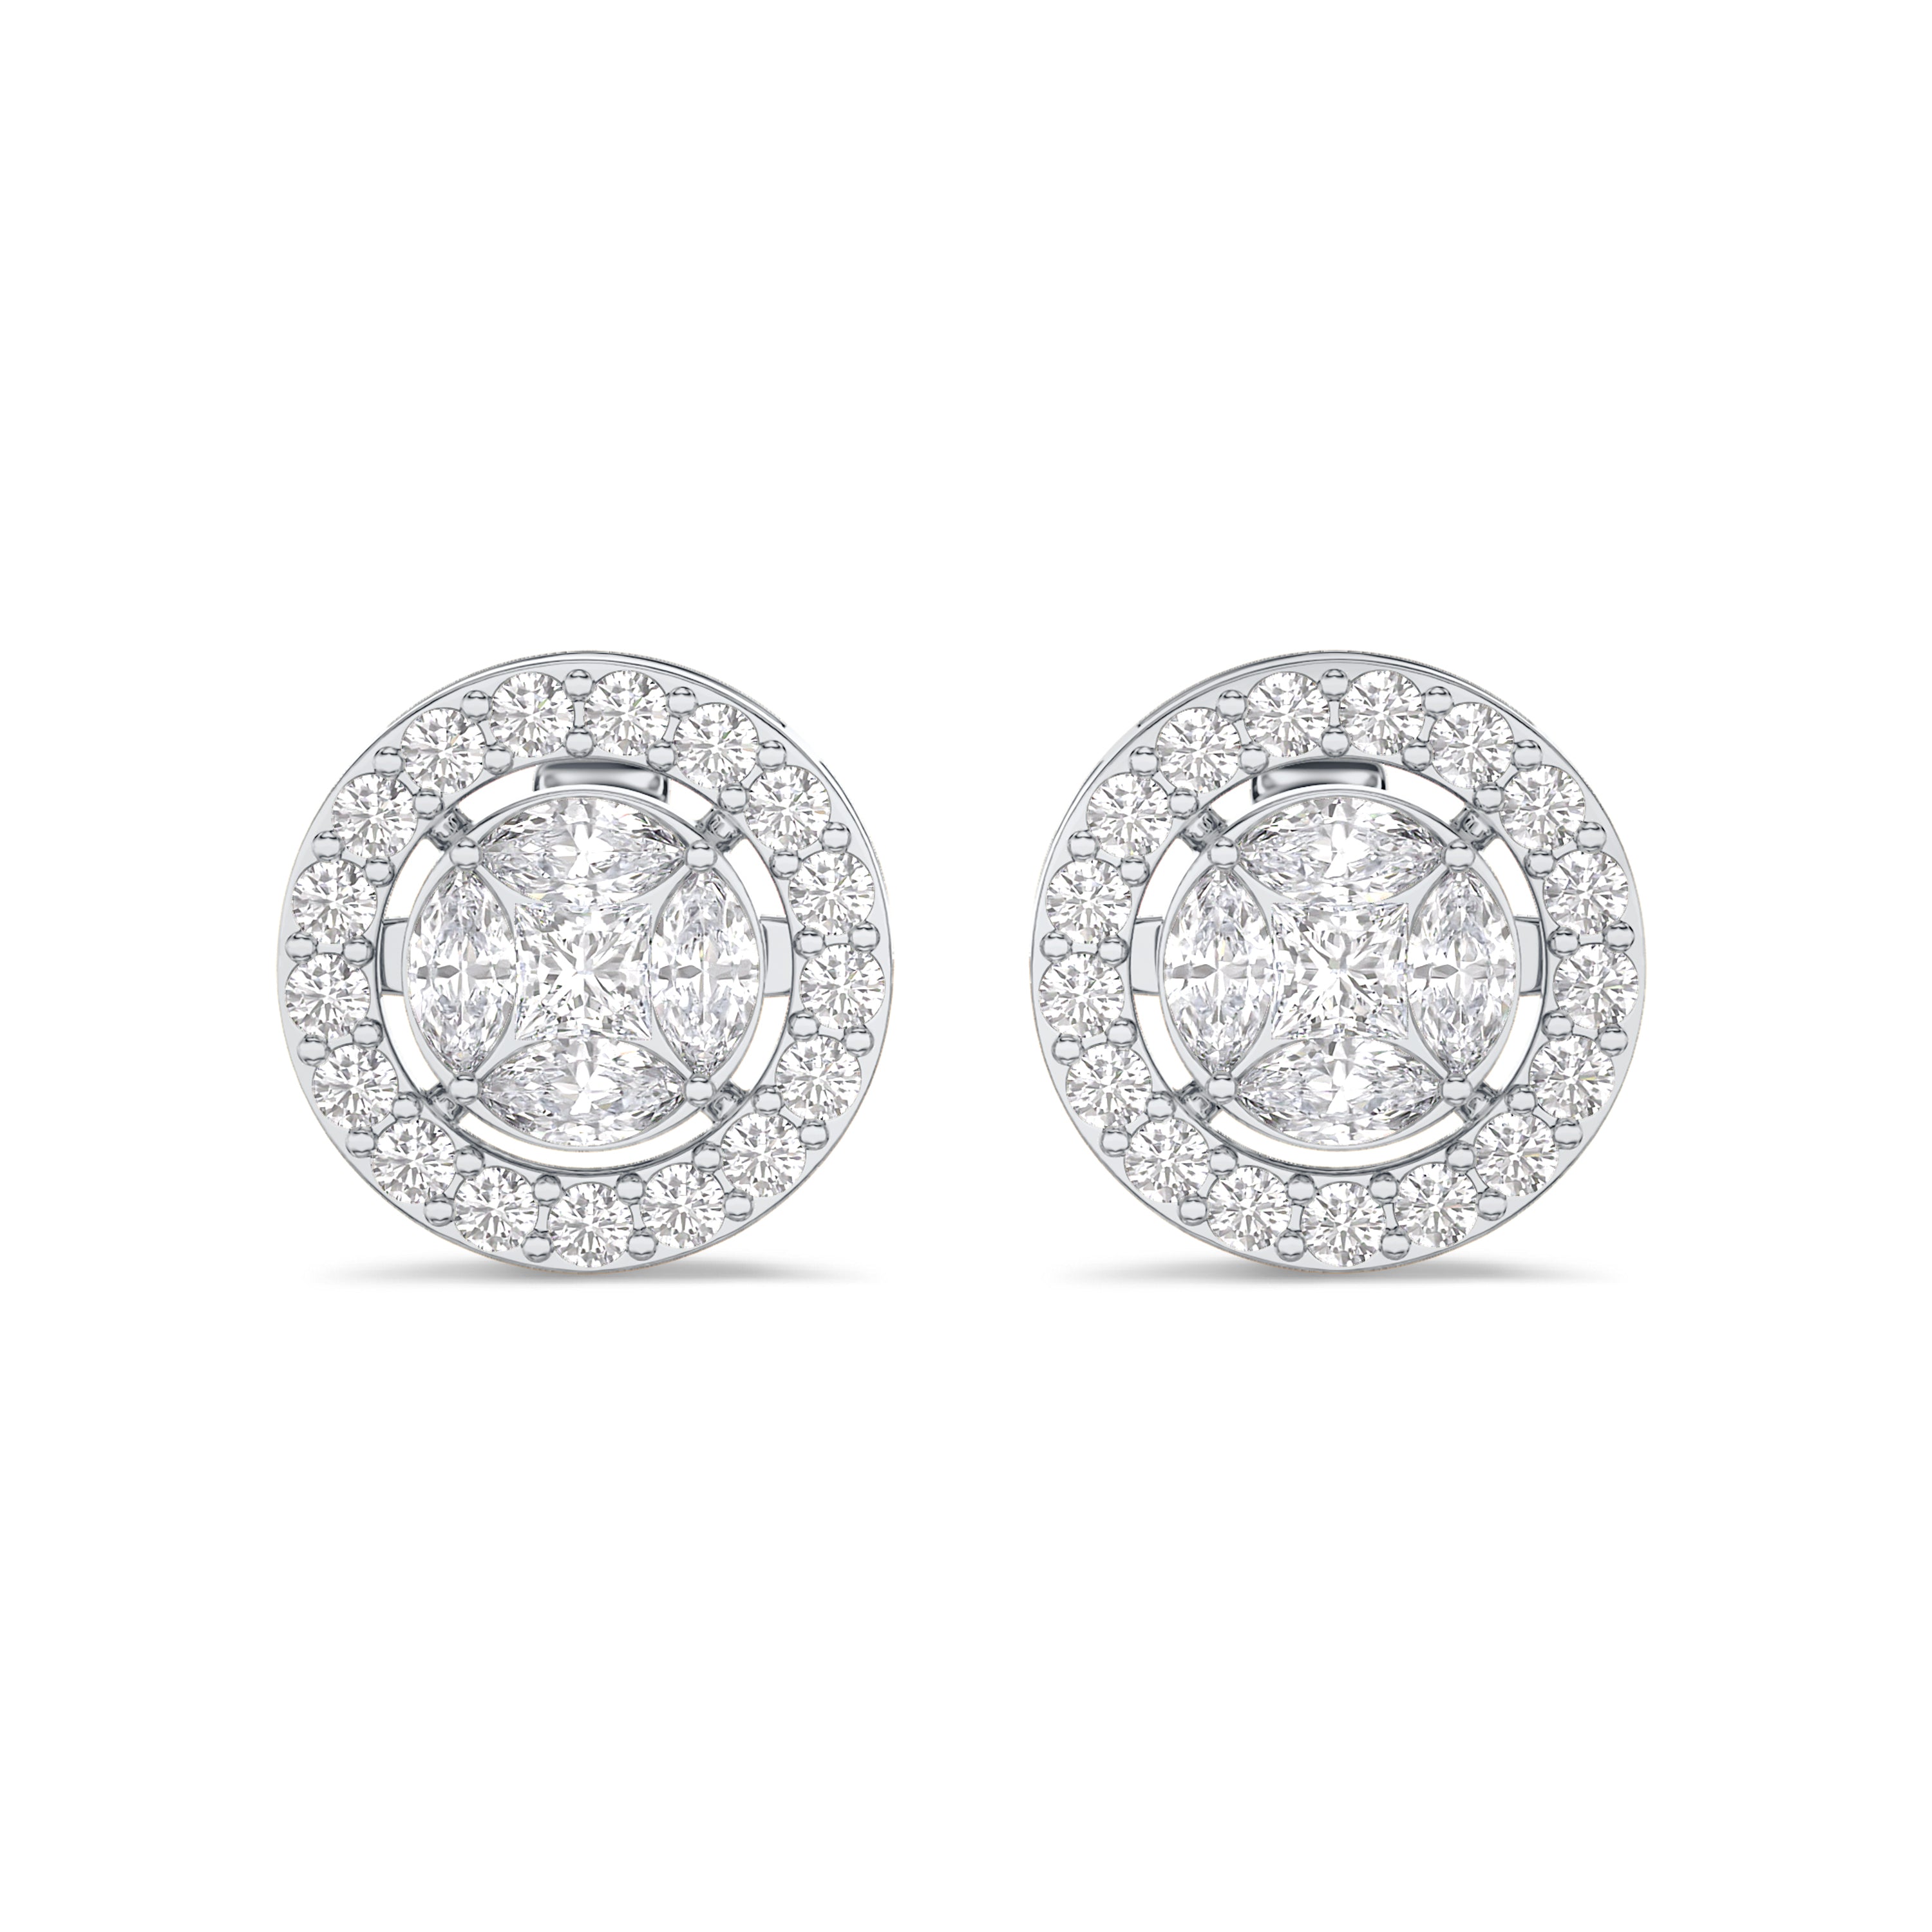 Round cluster diamond earrings in 18k gold, 0.72 carats, F-G color, VS-SI clarity, white gold #gold_white